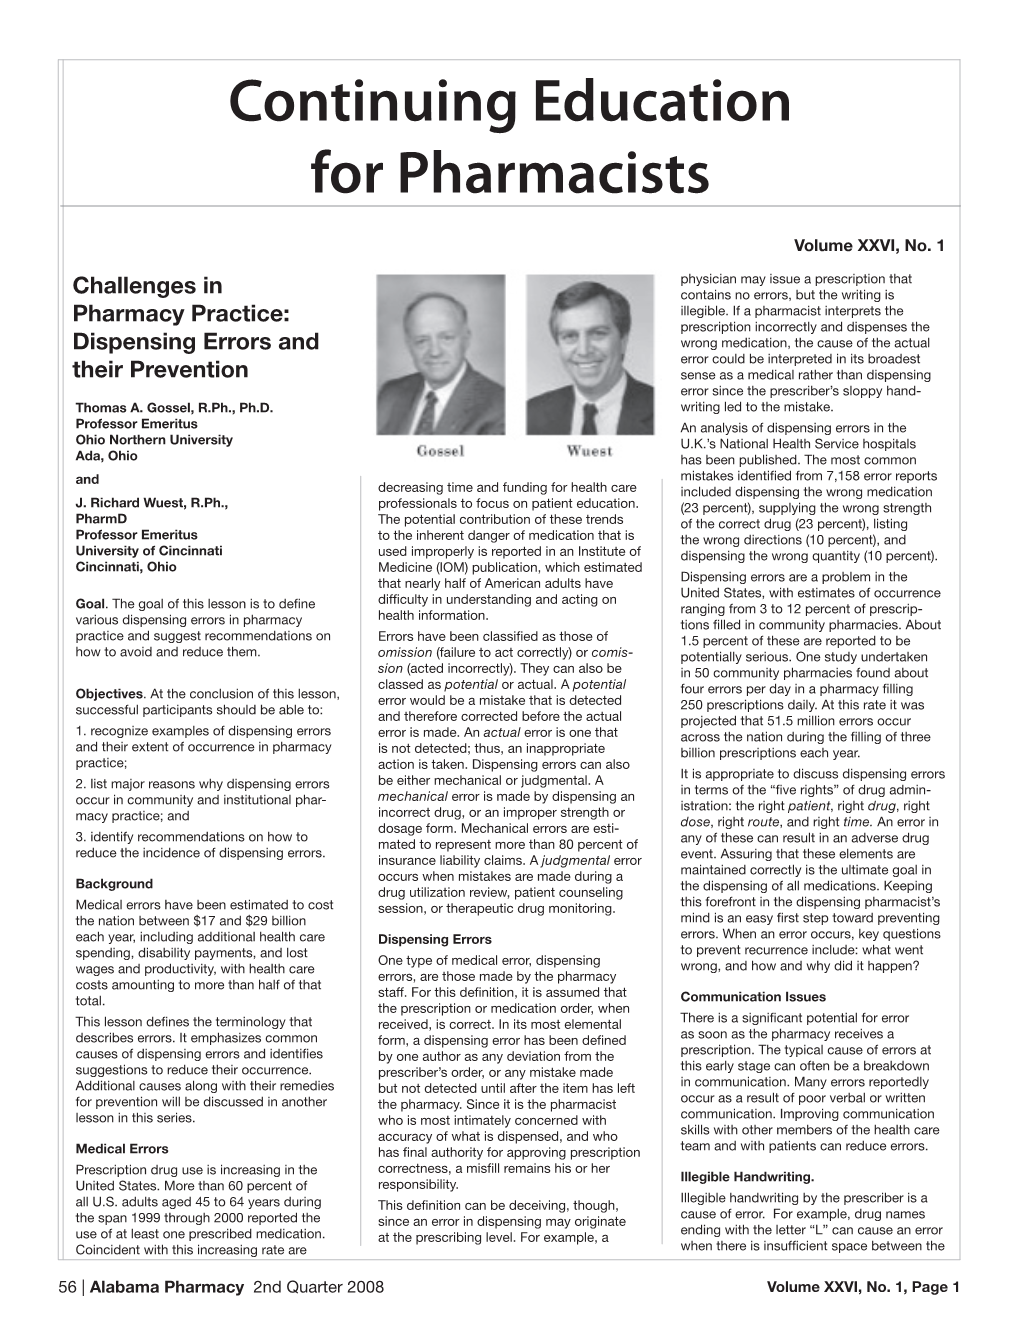 Continuing Education for Pharmacists